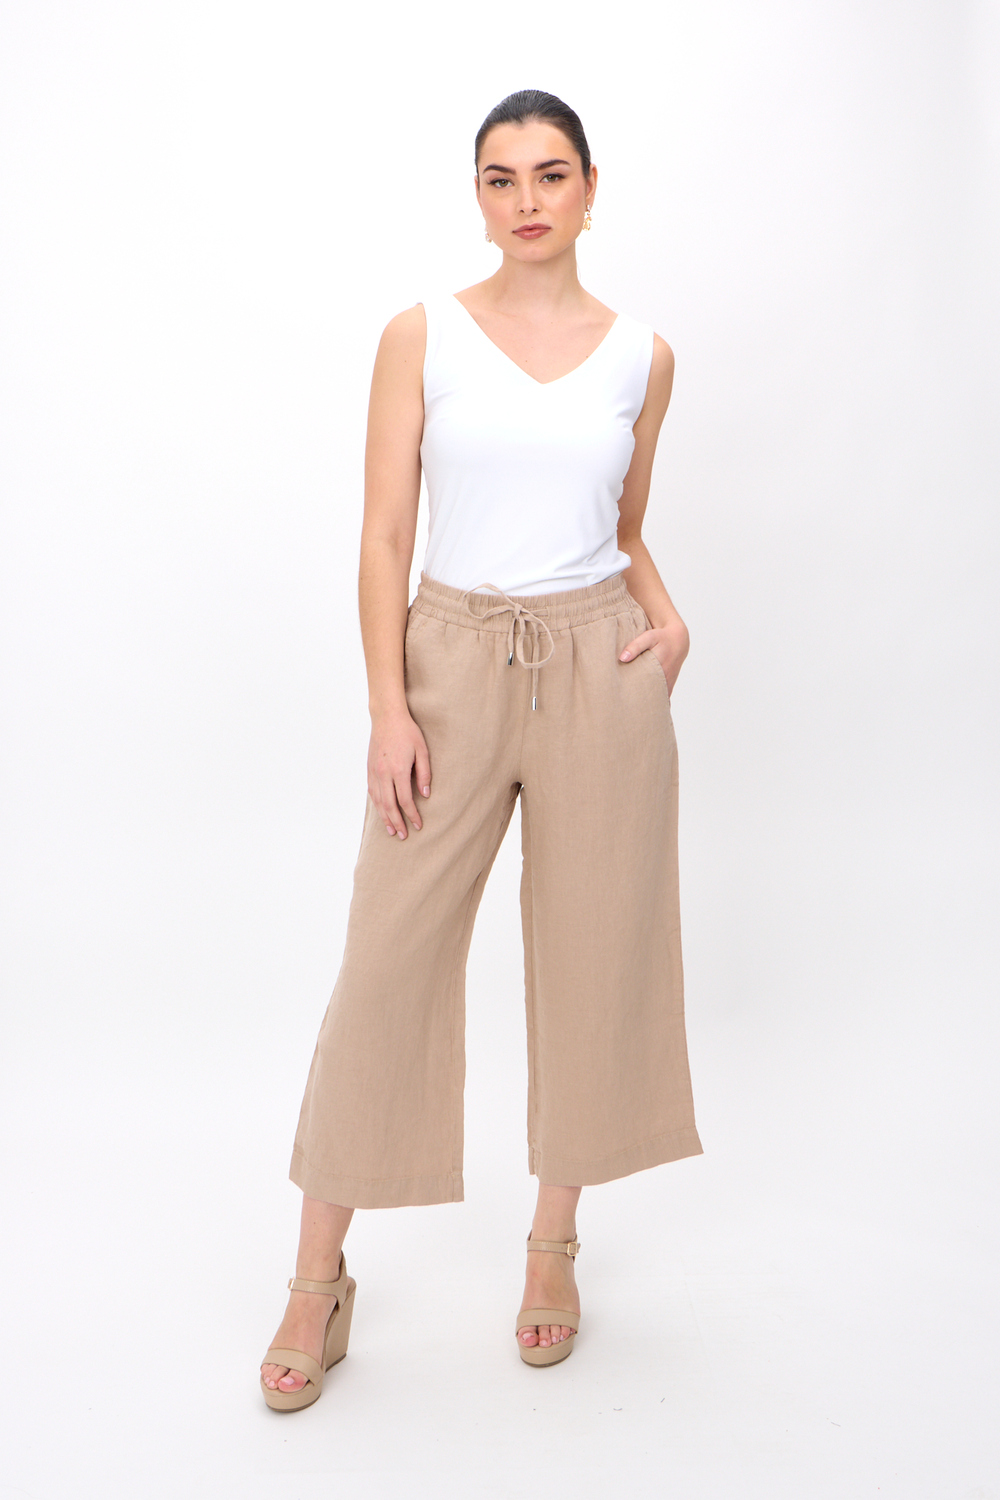 Dolcezza Woven Pant Style 24253. Beige